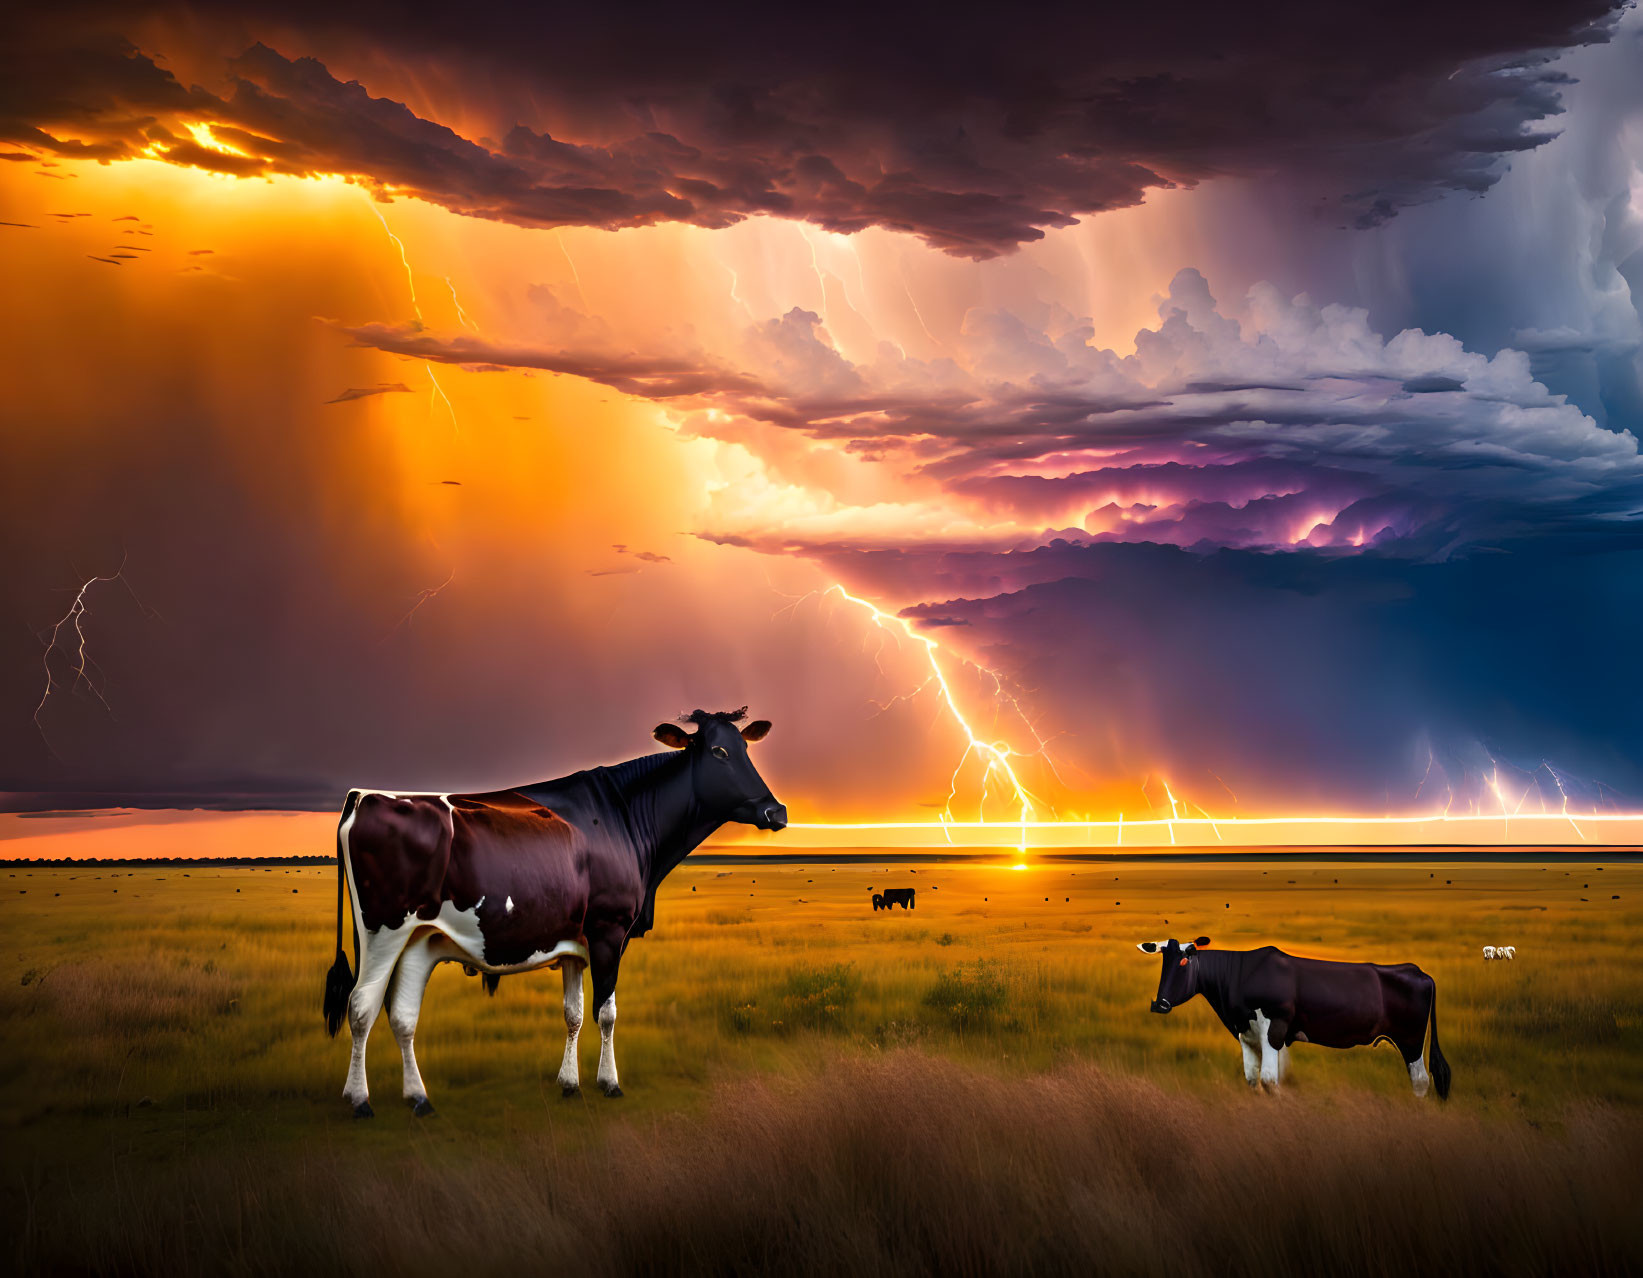 Cow and Calf in Field Under Dramatic Twilight Sky with Lightning Strikes